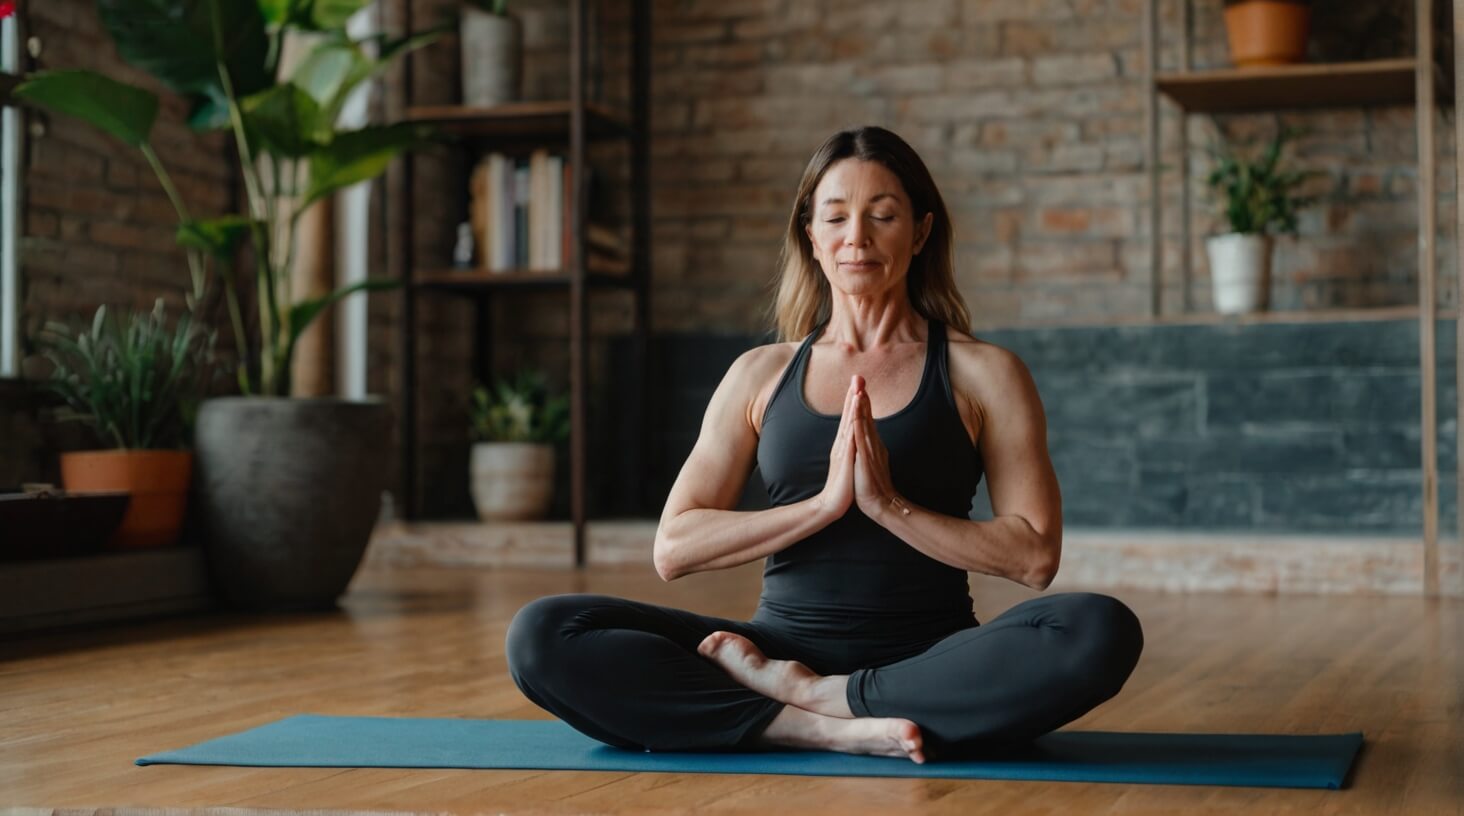 Image showing a serene yoga practitioner in a meditative pose, representing the connection between yoga practice and hormonal balance.